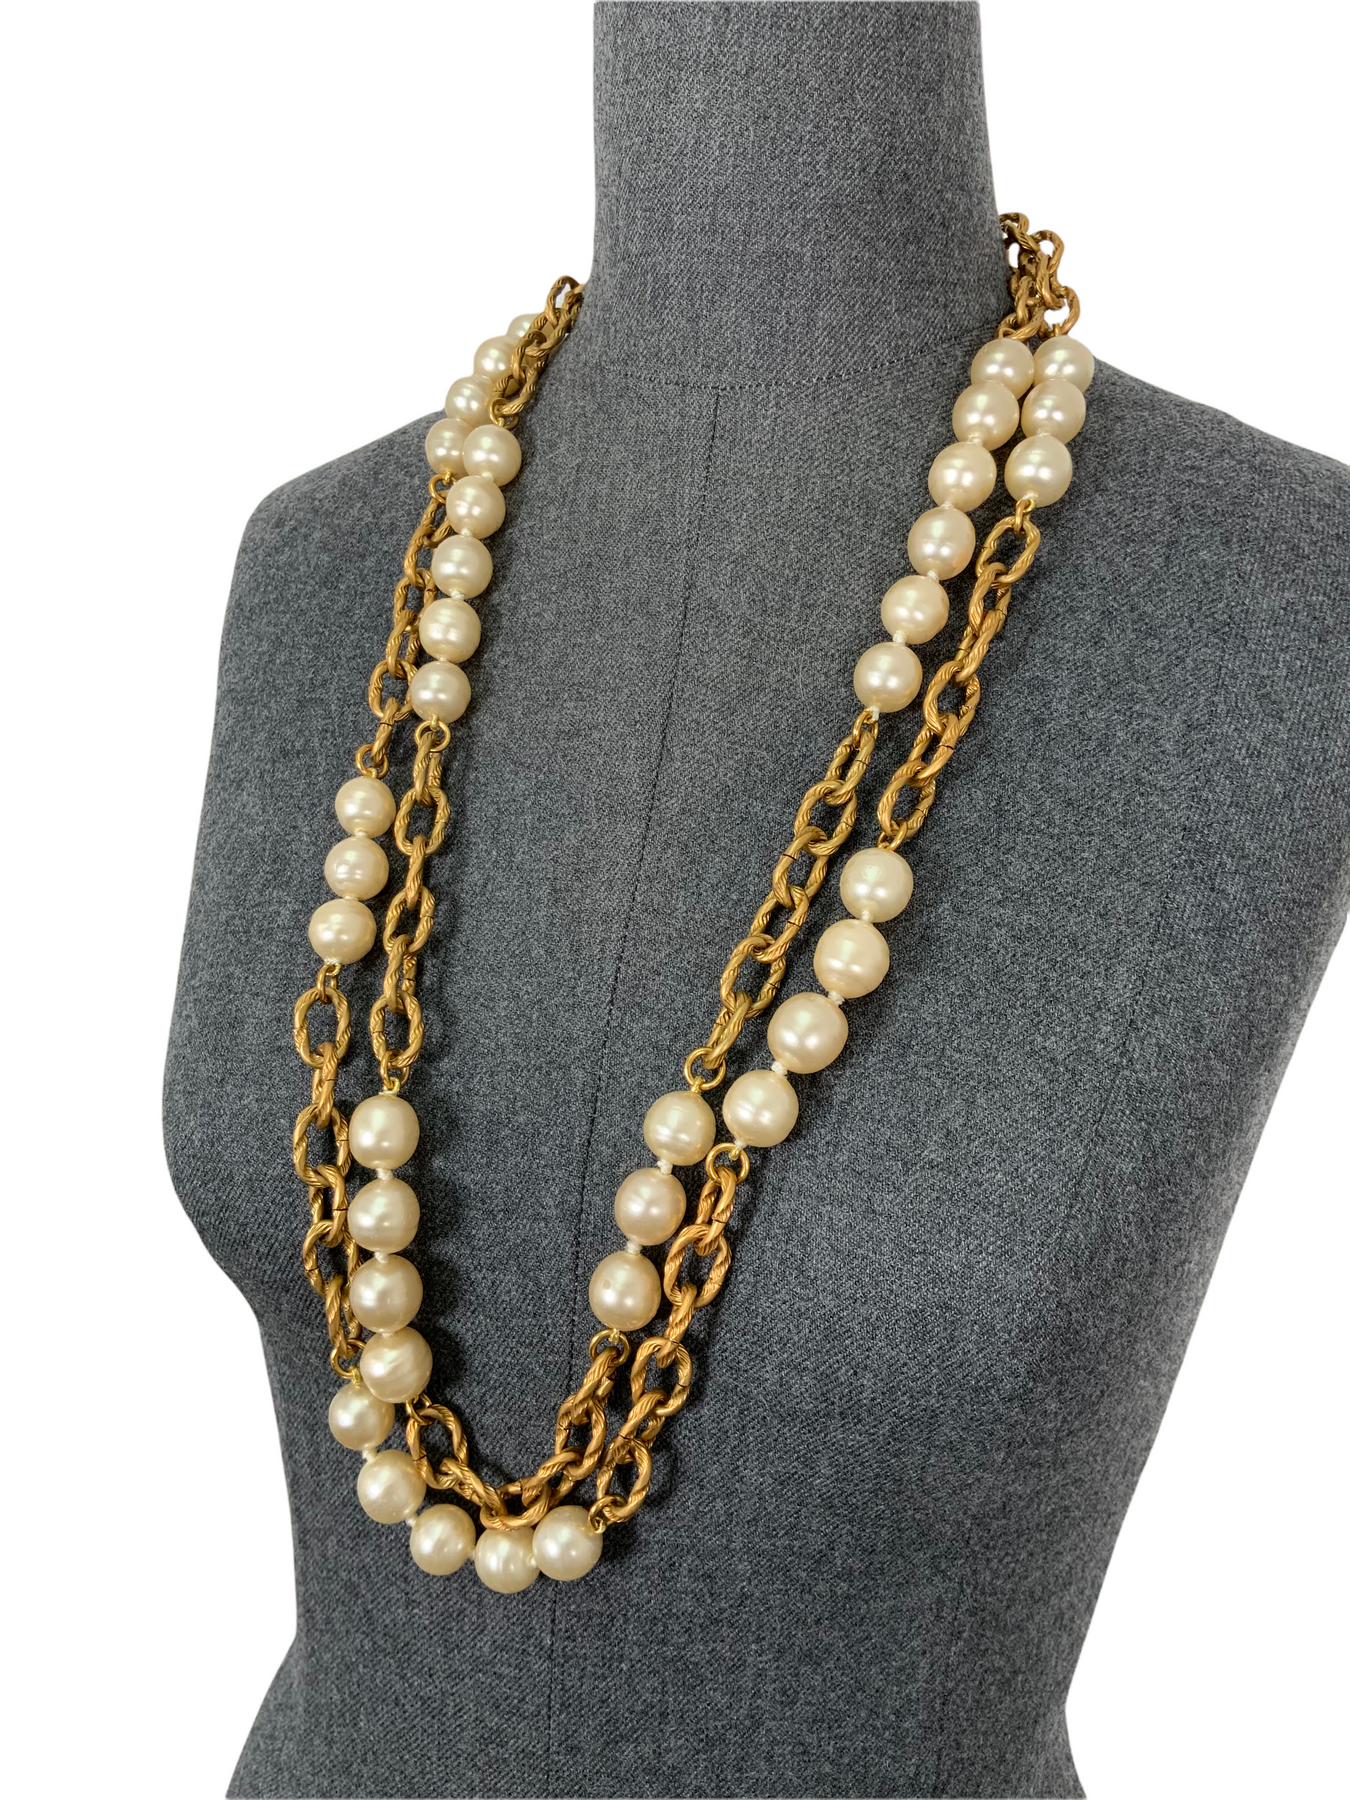 Chanel Vintage 1993 Faux Pearl Chunky Chain Link Necklace